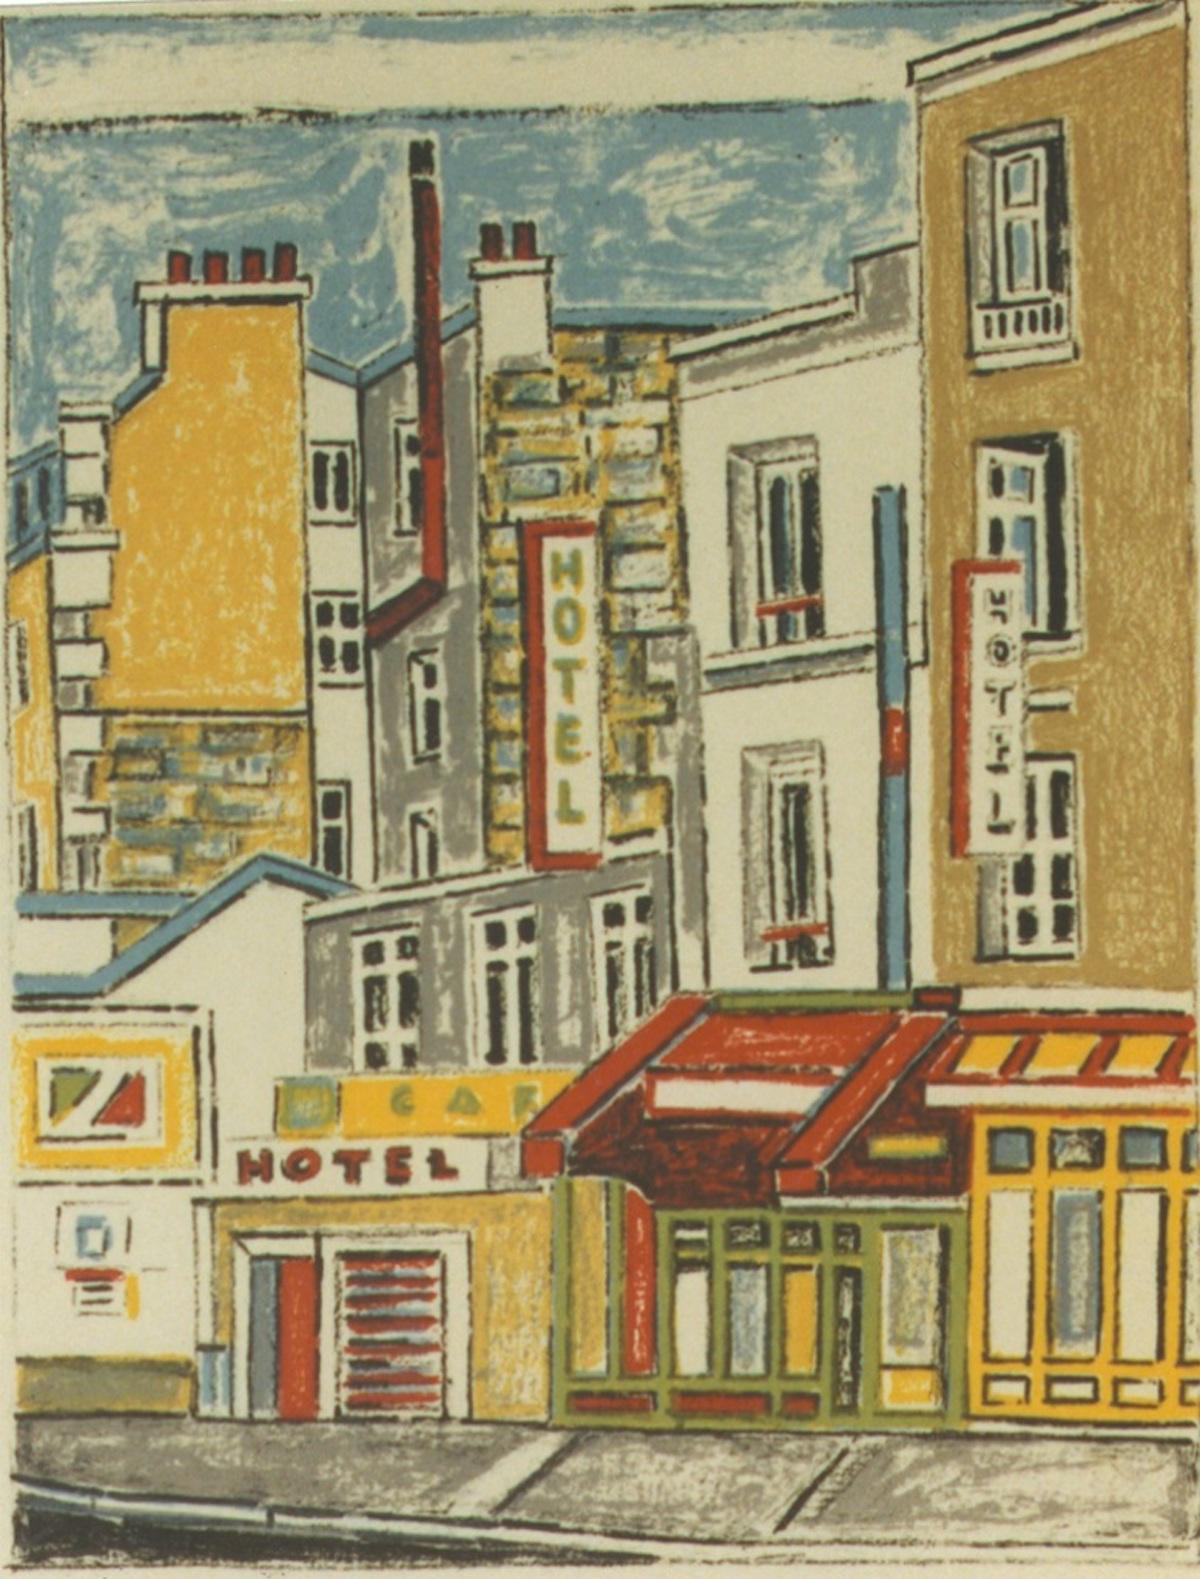 Paris, Houses and Walls - Lithograph by Orfeo Tamburi - 1980s